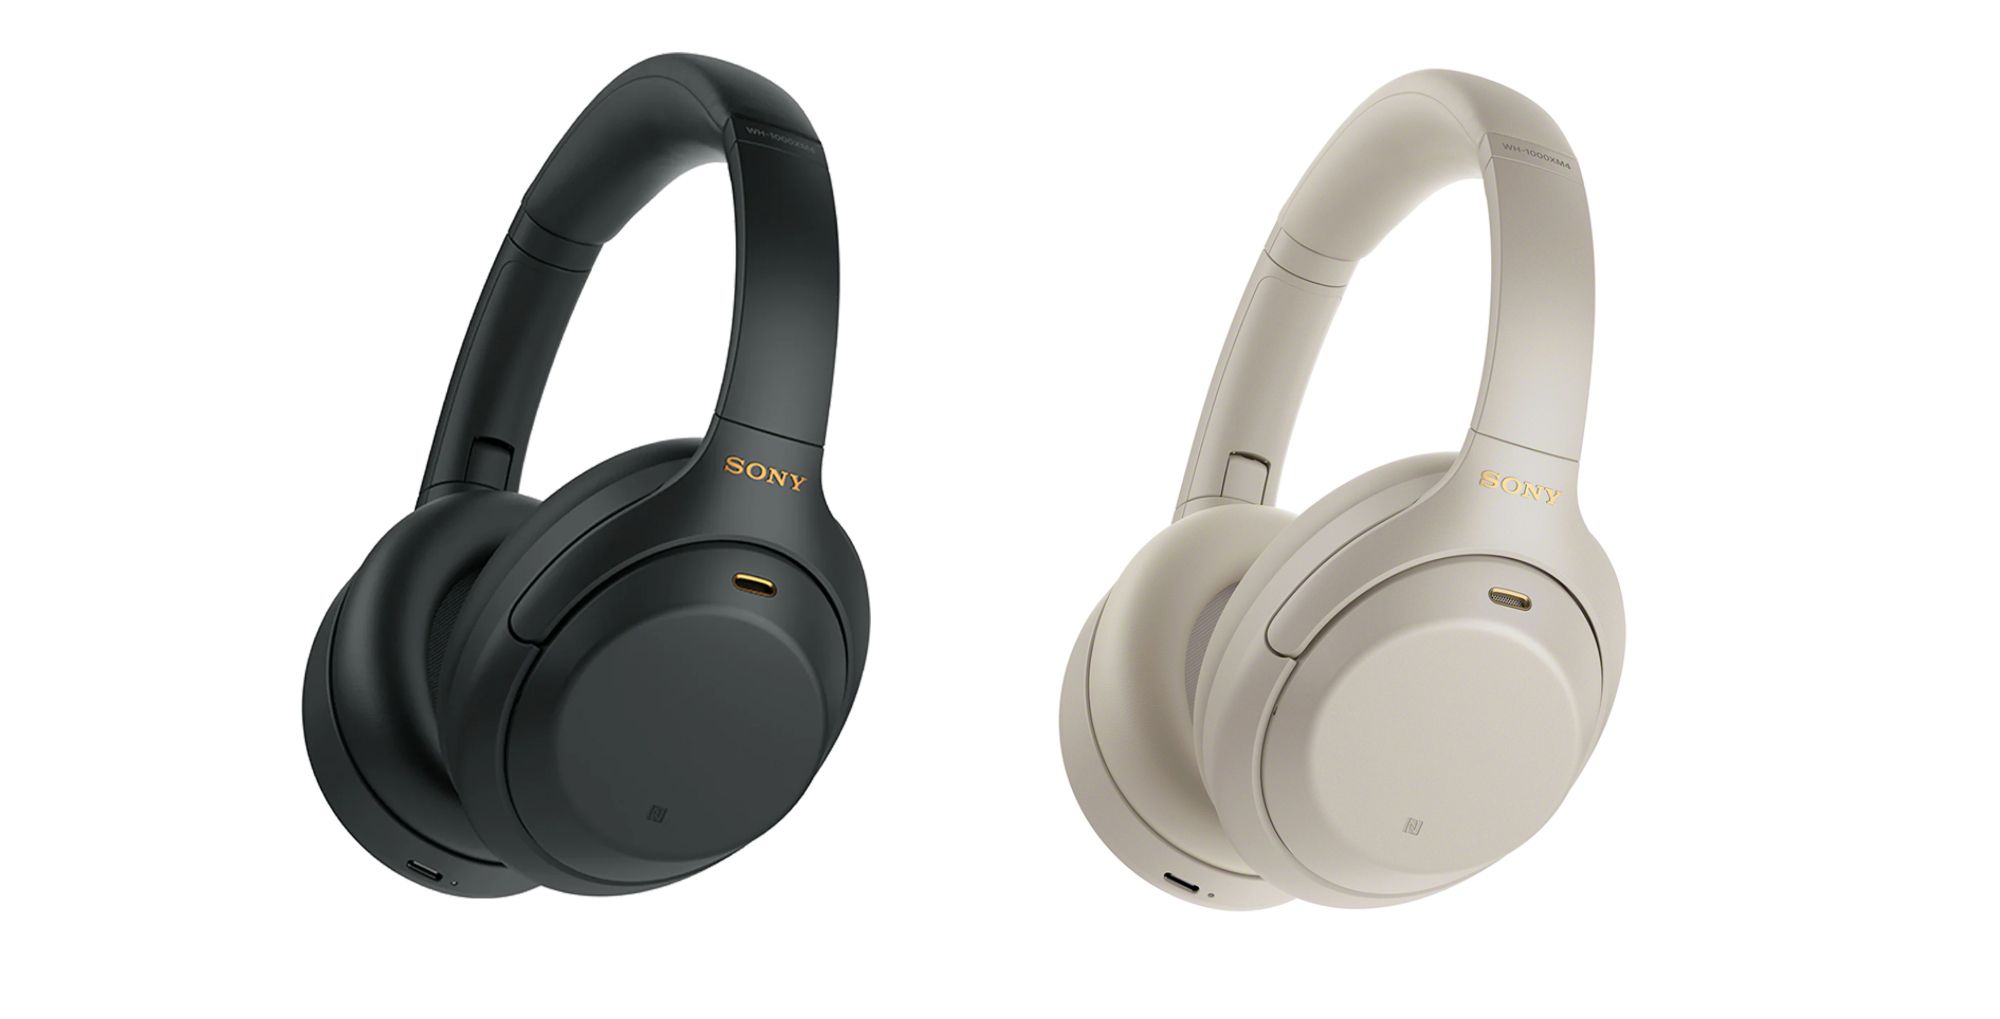 Sony WH-1000XM4 headphones in different colors